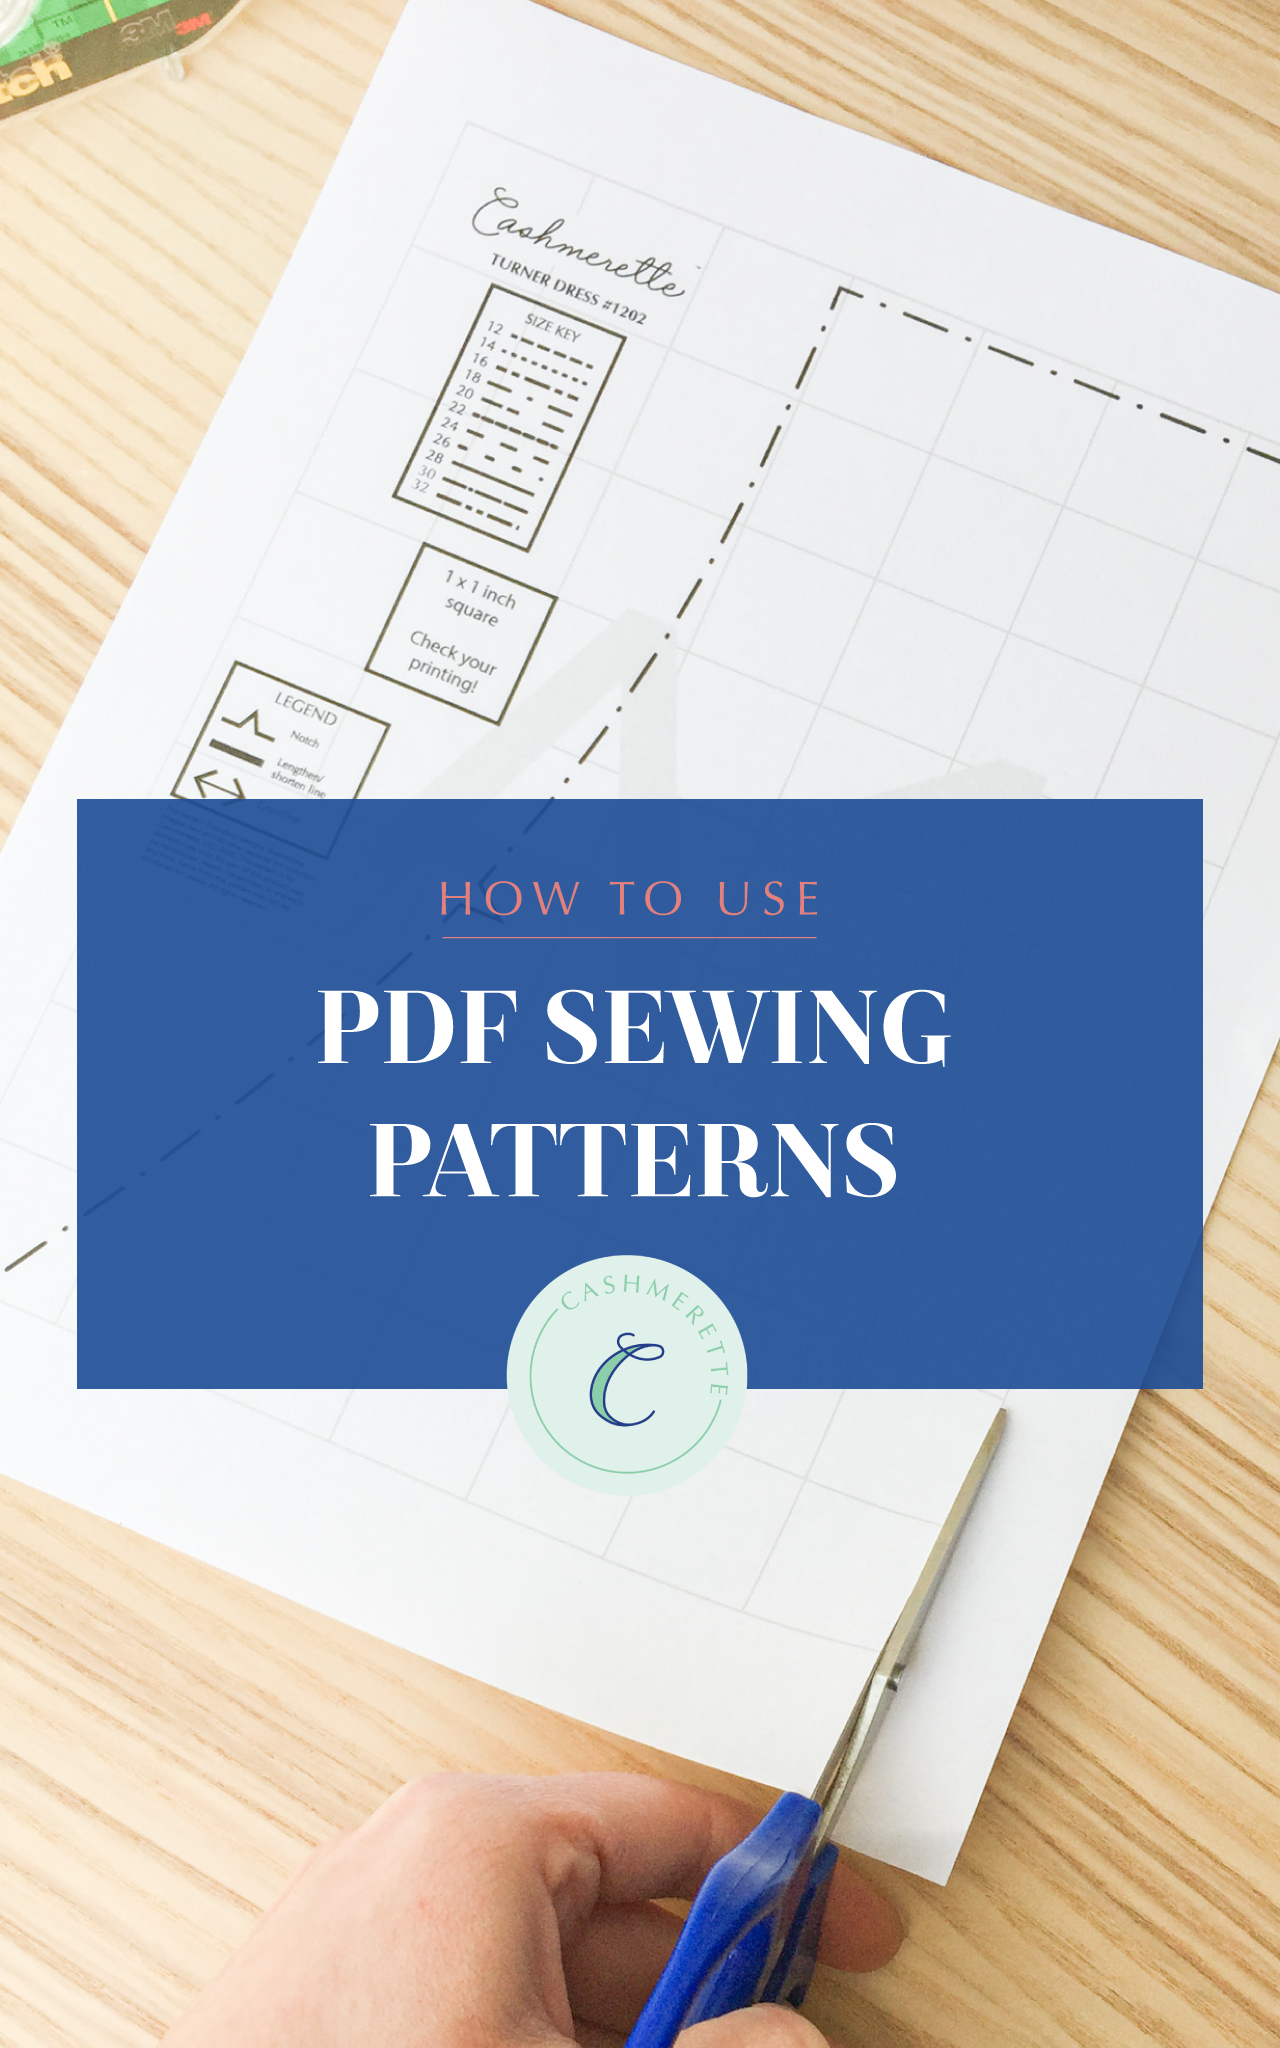 How to Use PDF Sewing Patterns: Everything You Need to Know to Get Started